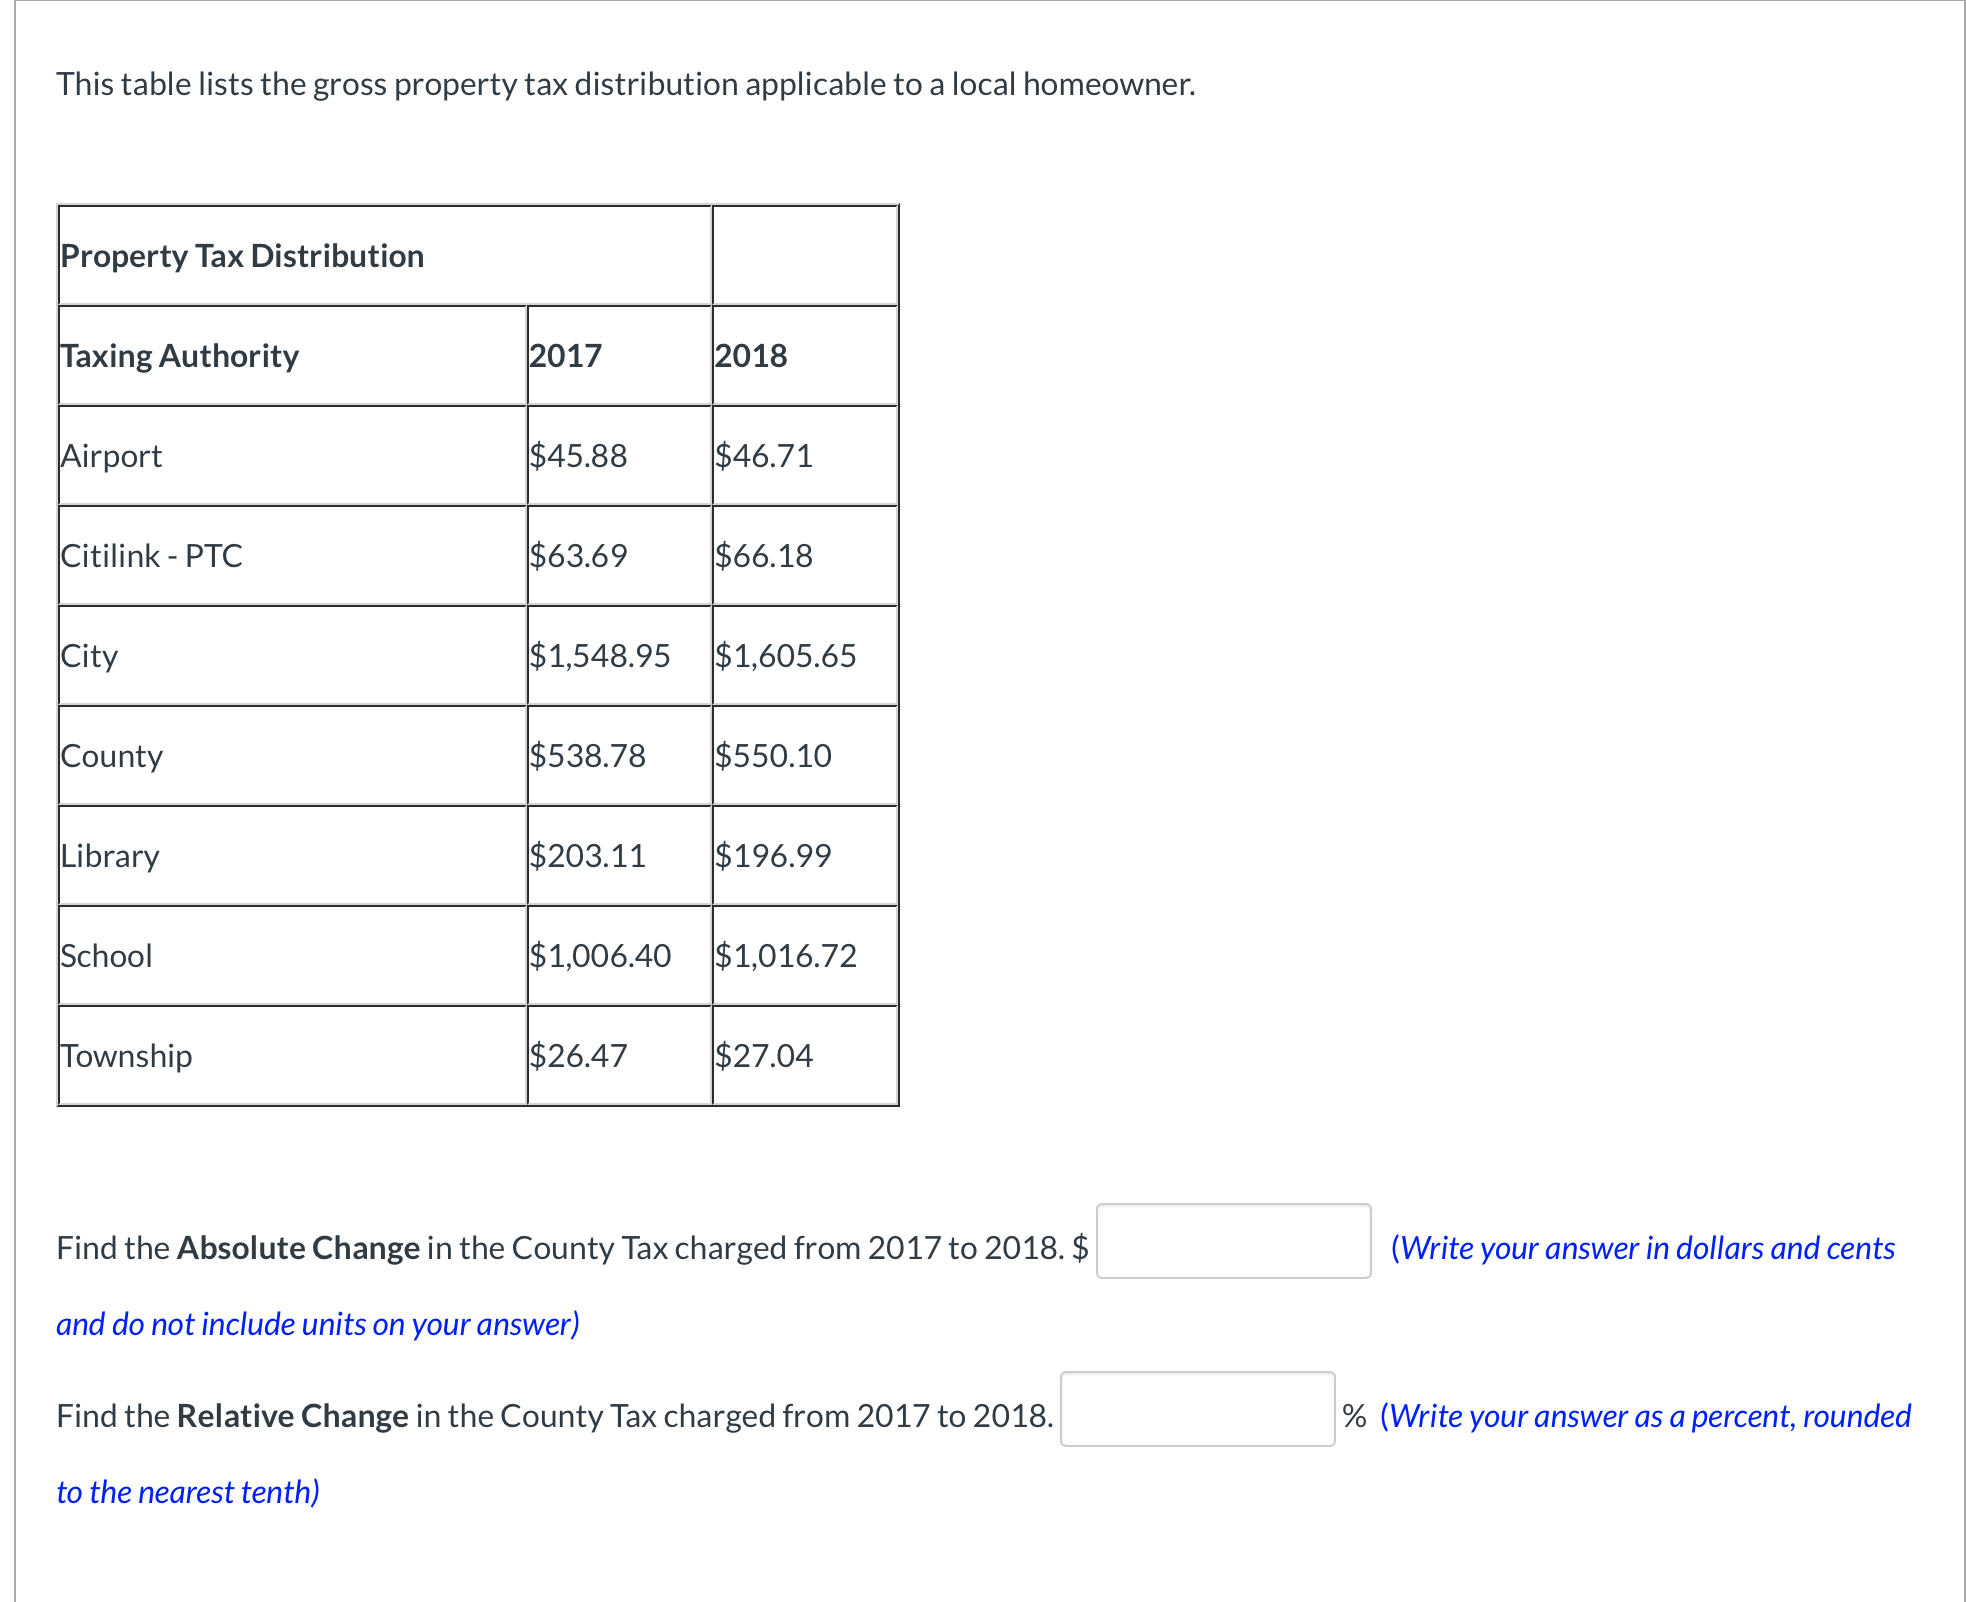 This table lists the gross property tax distribution applicable to a local homeowner.
Property Tax Distribution
Taxing Authority
2017
2018
Airport
$45.88
$46.71
Citilink - PTC
$63.69
$66.18
City
$1,548.95
$1,605.65
County
$538.78
$550.10
Library
$203.11
$196.99
School
$1,006.40
$1,016.72
Township
$26.47
$27.04
Find the Absolute Change in the County Tax charged from 2017 to 2018. $
(Write your answer in dollars and cents
and do not include units on your answer)
Find the Relative Change in the County Tax charged from 2017 to 2018.
% (Write your answer as a percent, rounded
to the nearest tenth)
